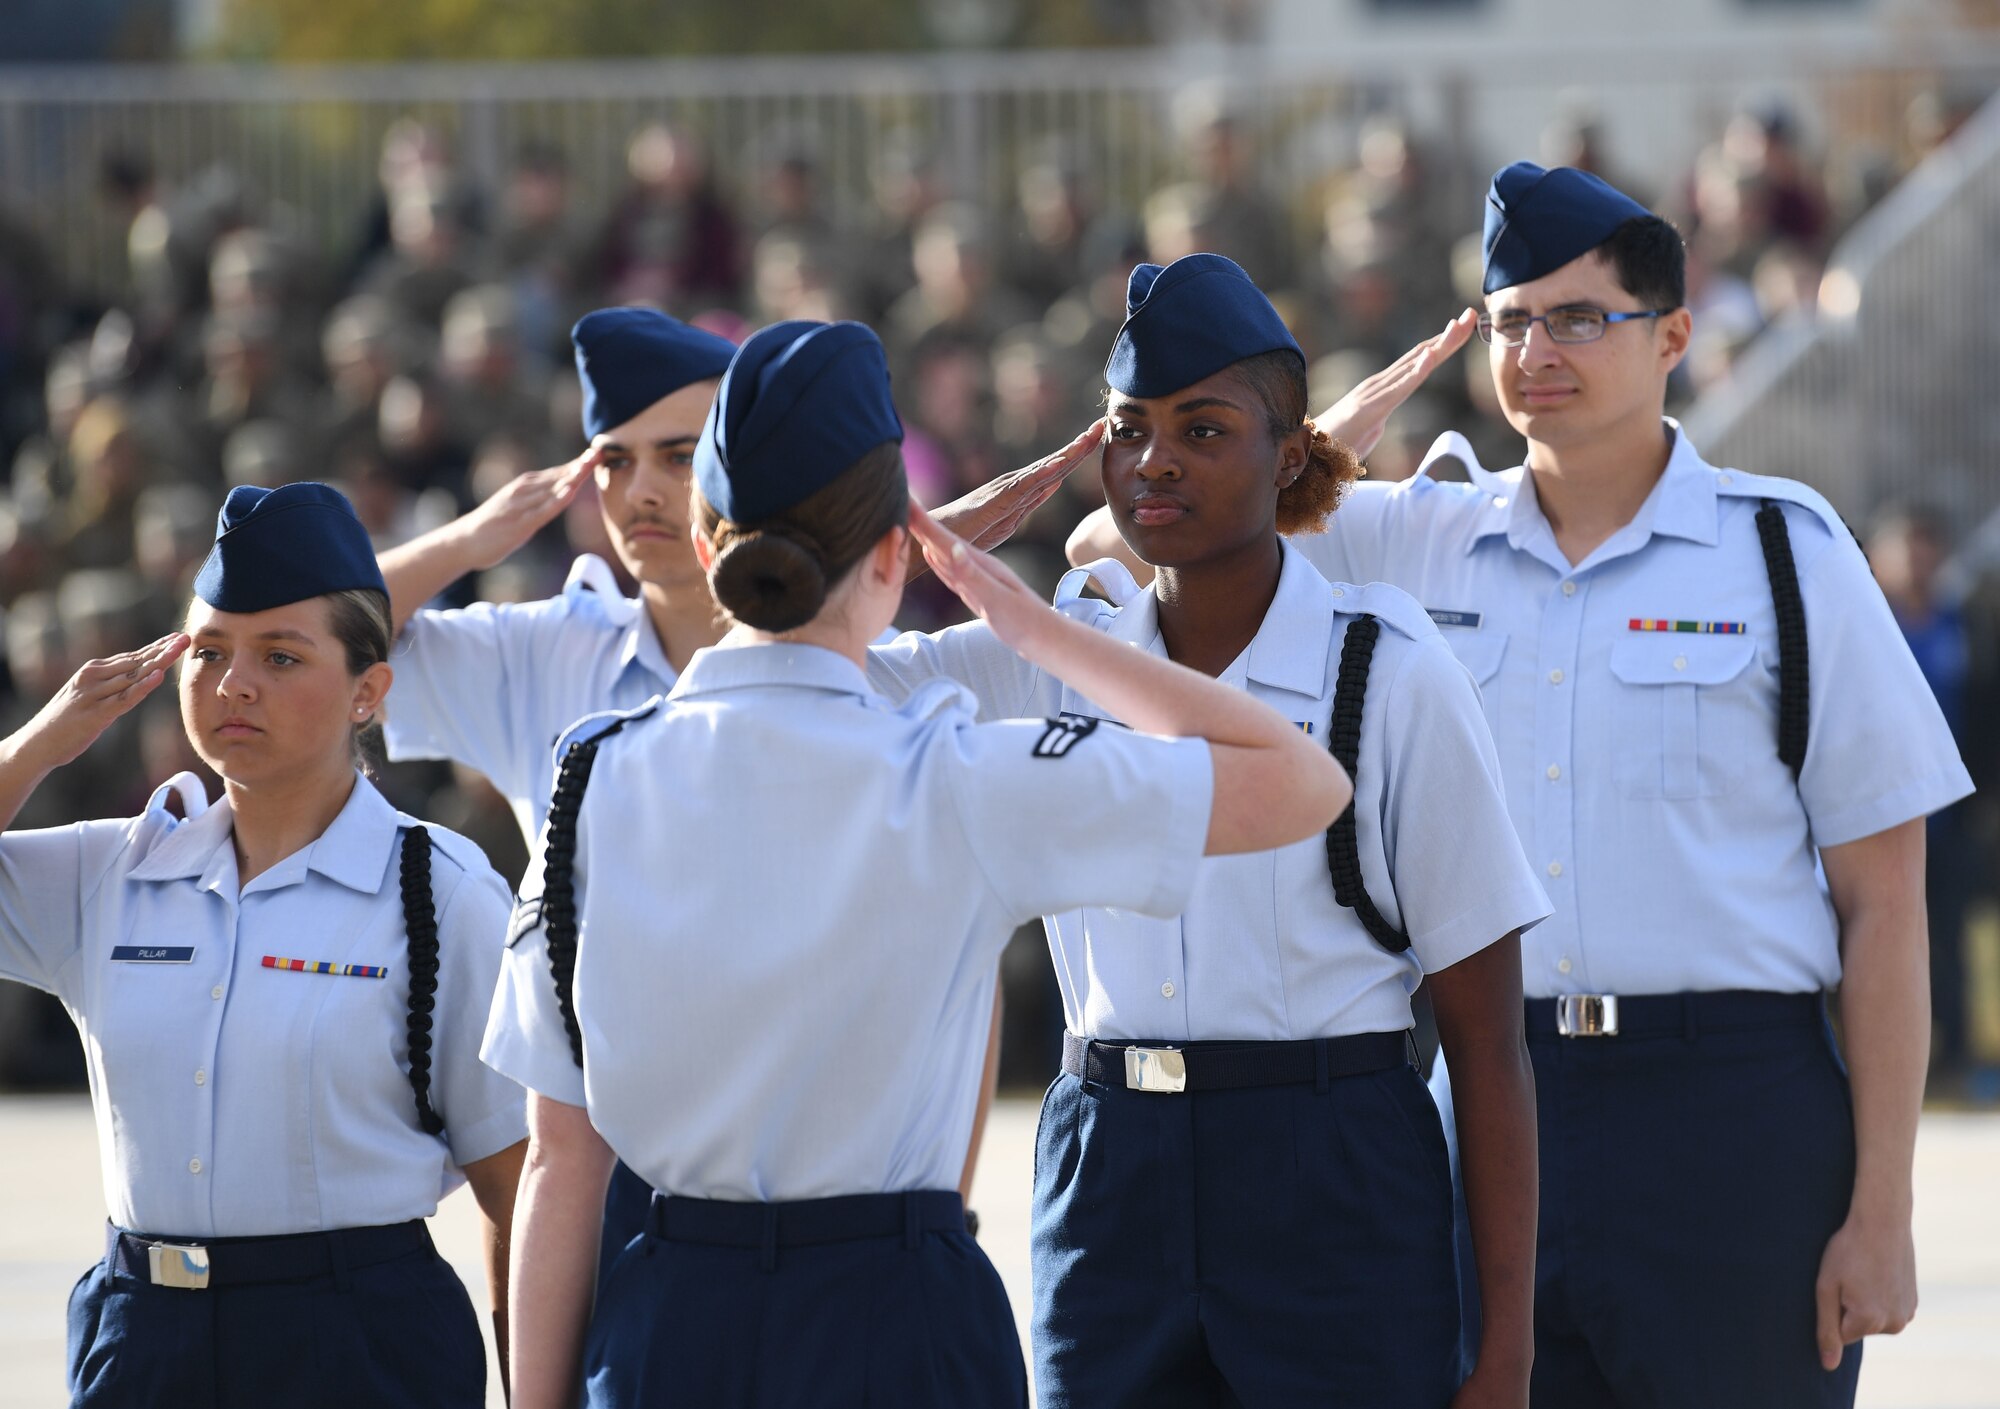 Members of the 334th Training Squadron regulation drill team perform during the 81st Training Group drill down on the Levitow Training Support Facility drill pad at Keesler Air Force Base, Mississippi, Oct. 28, 2022.